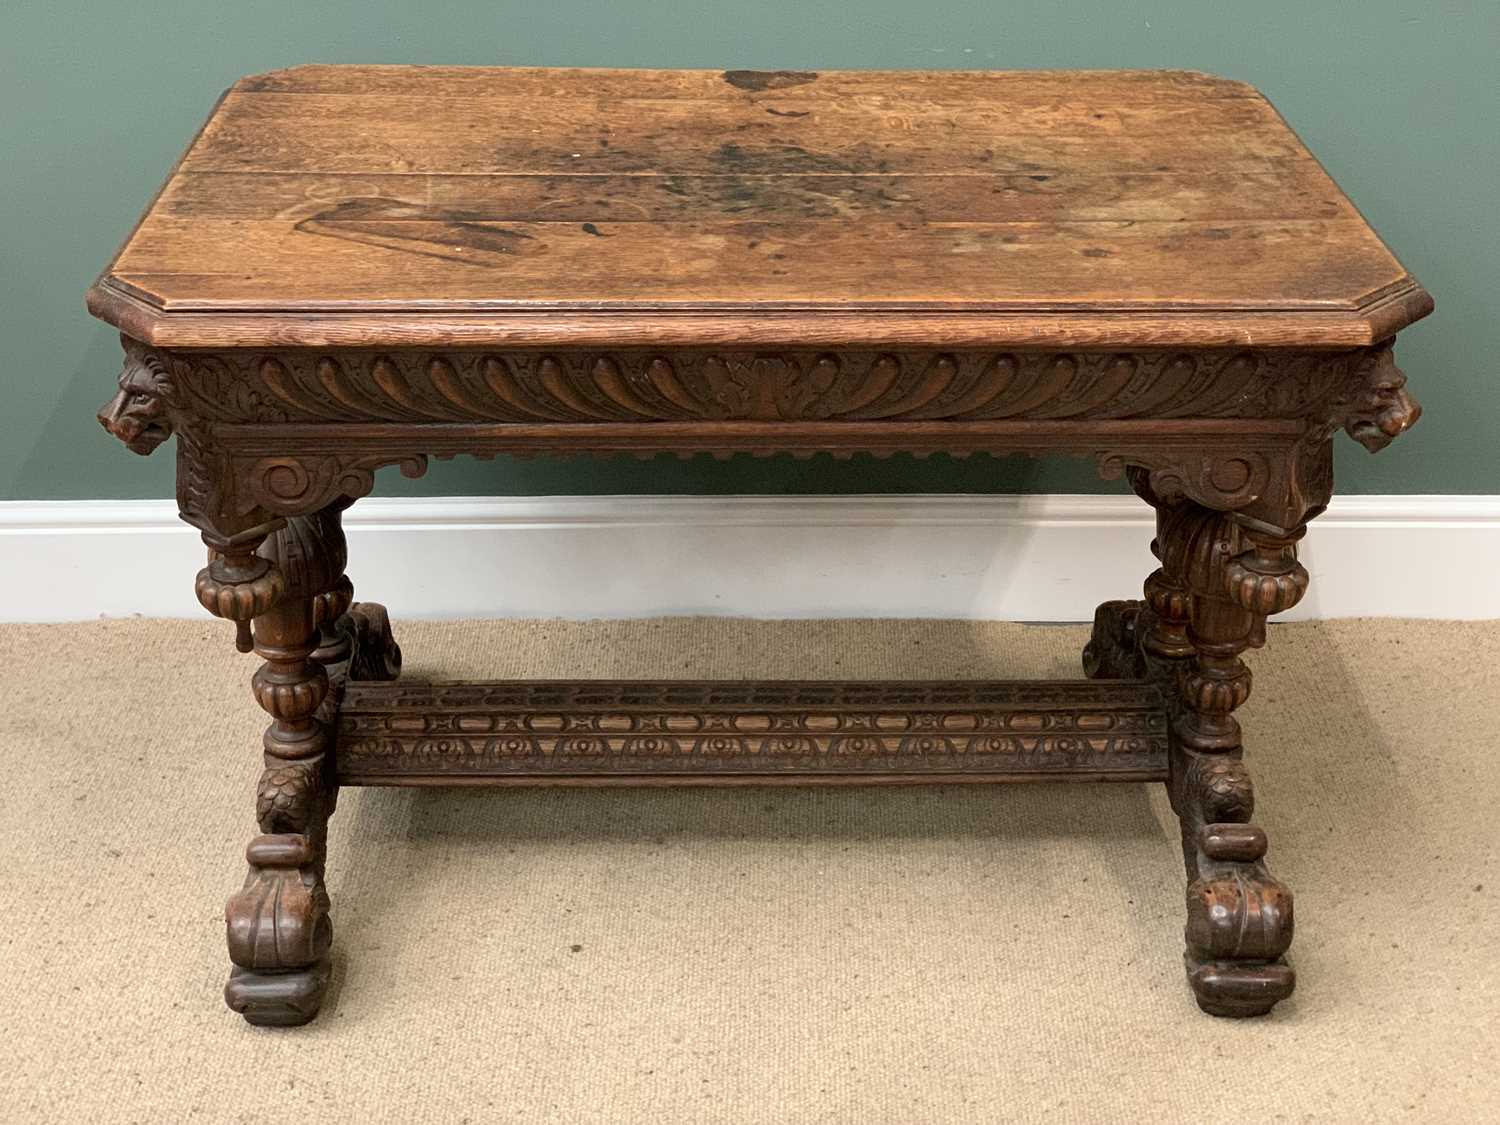 RENAISSANCE REVIVAL STYLE ANTIQUE CARVED OAK LIBRARY TABLE with lion mask detail and single drawer - Image 2 of 5